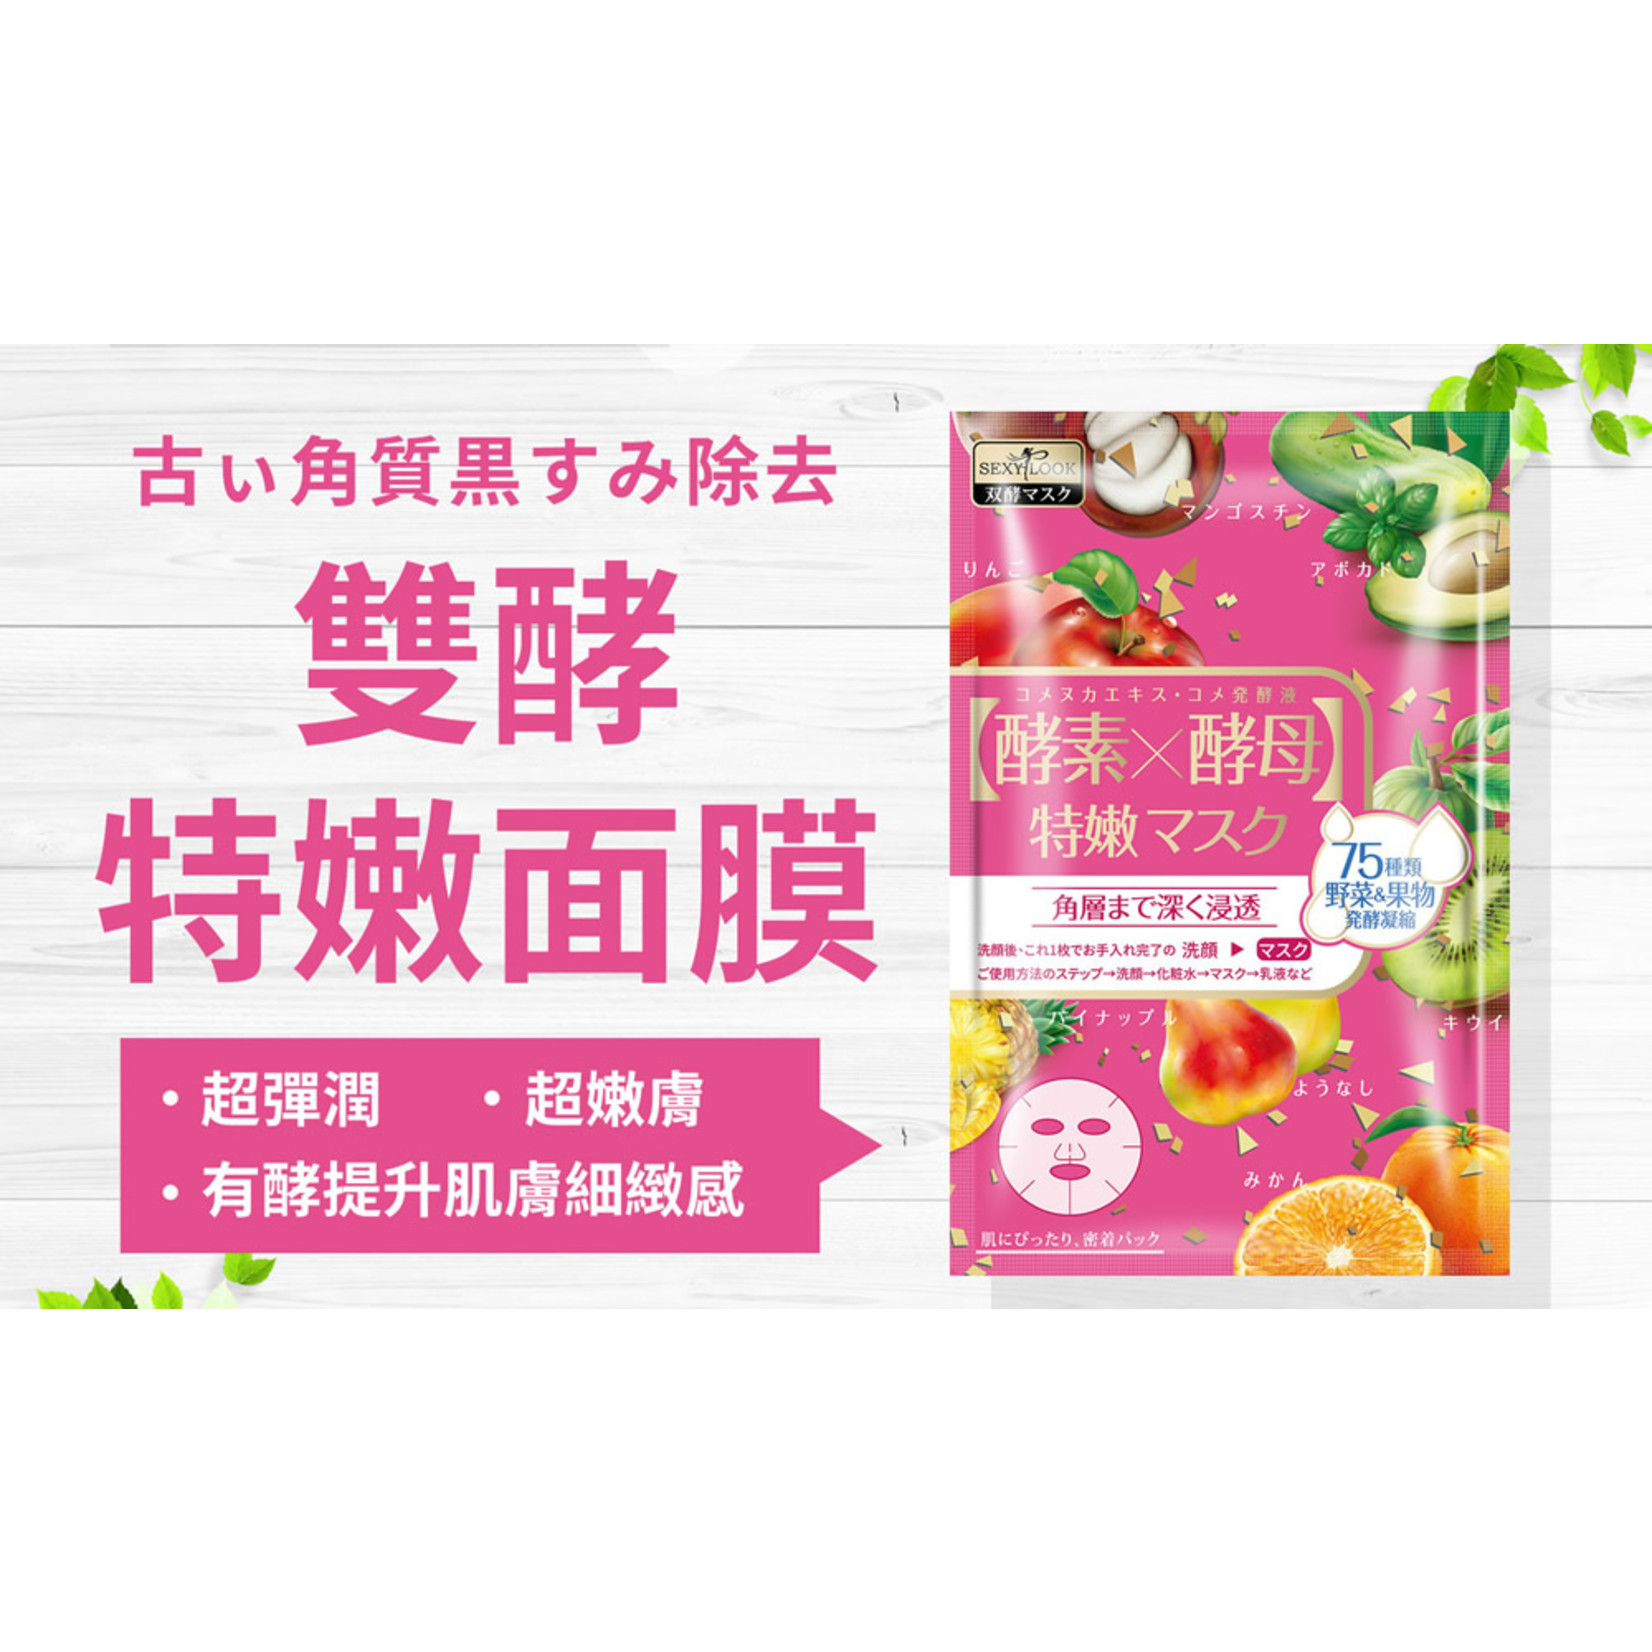 SEXYLOOK Enzyme X Yeast Rejuvenation Mask